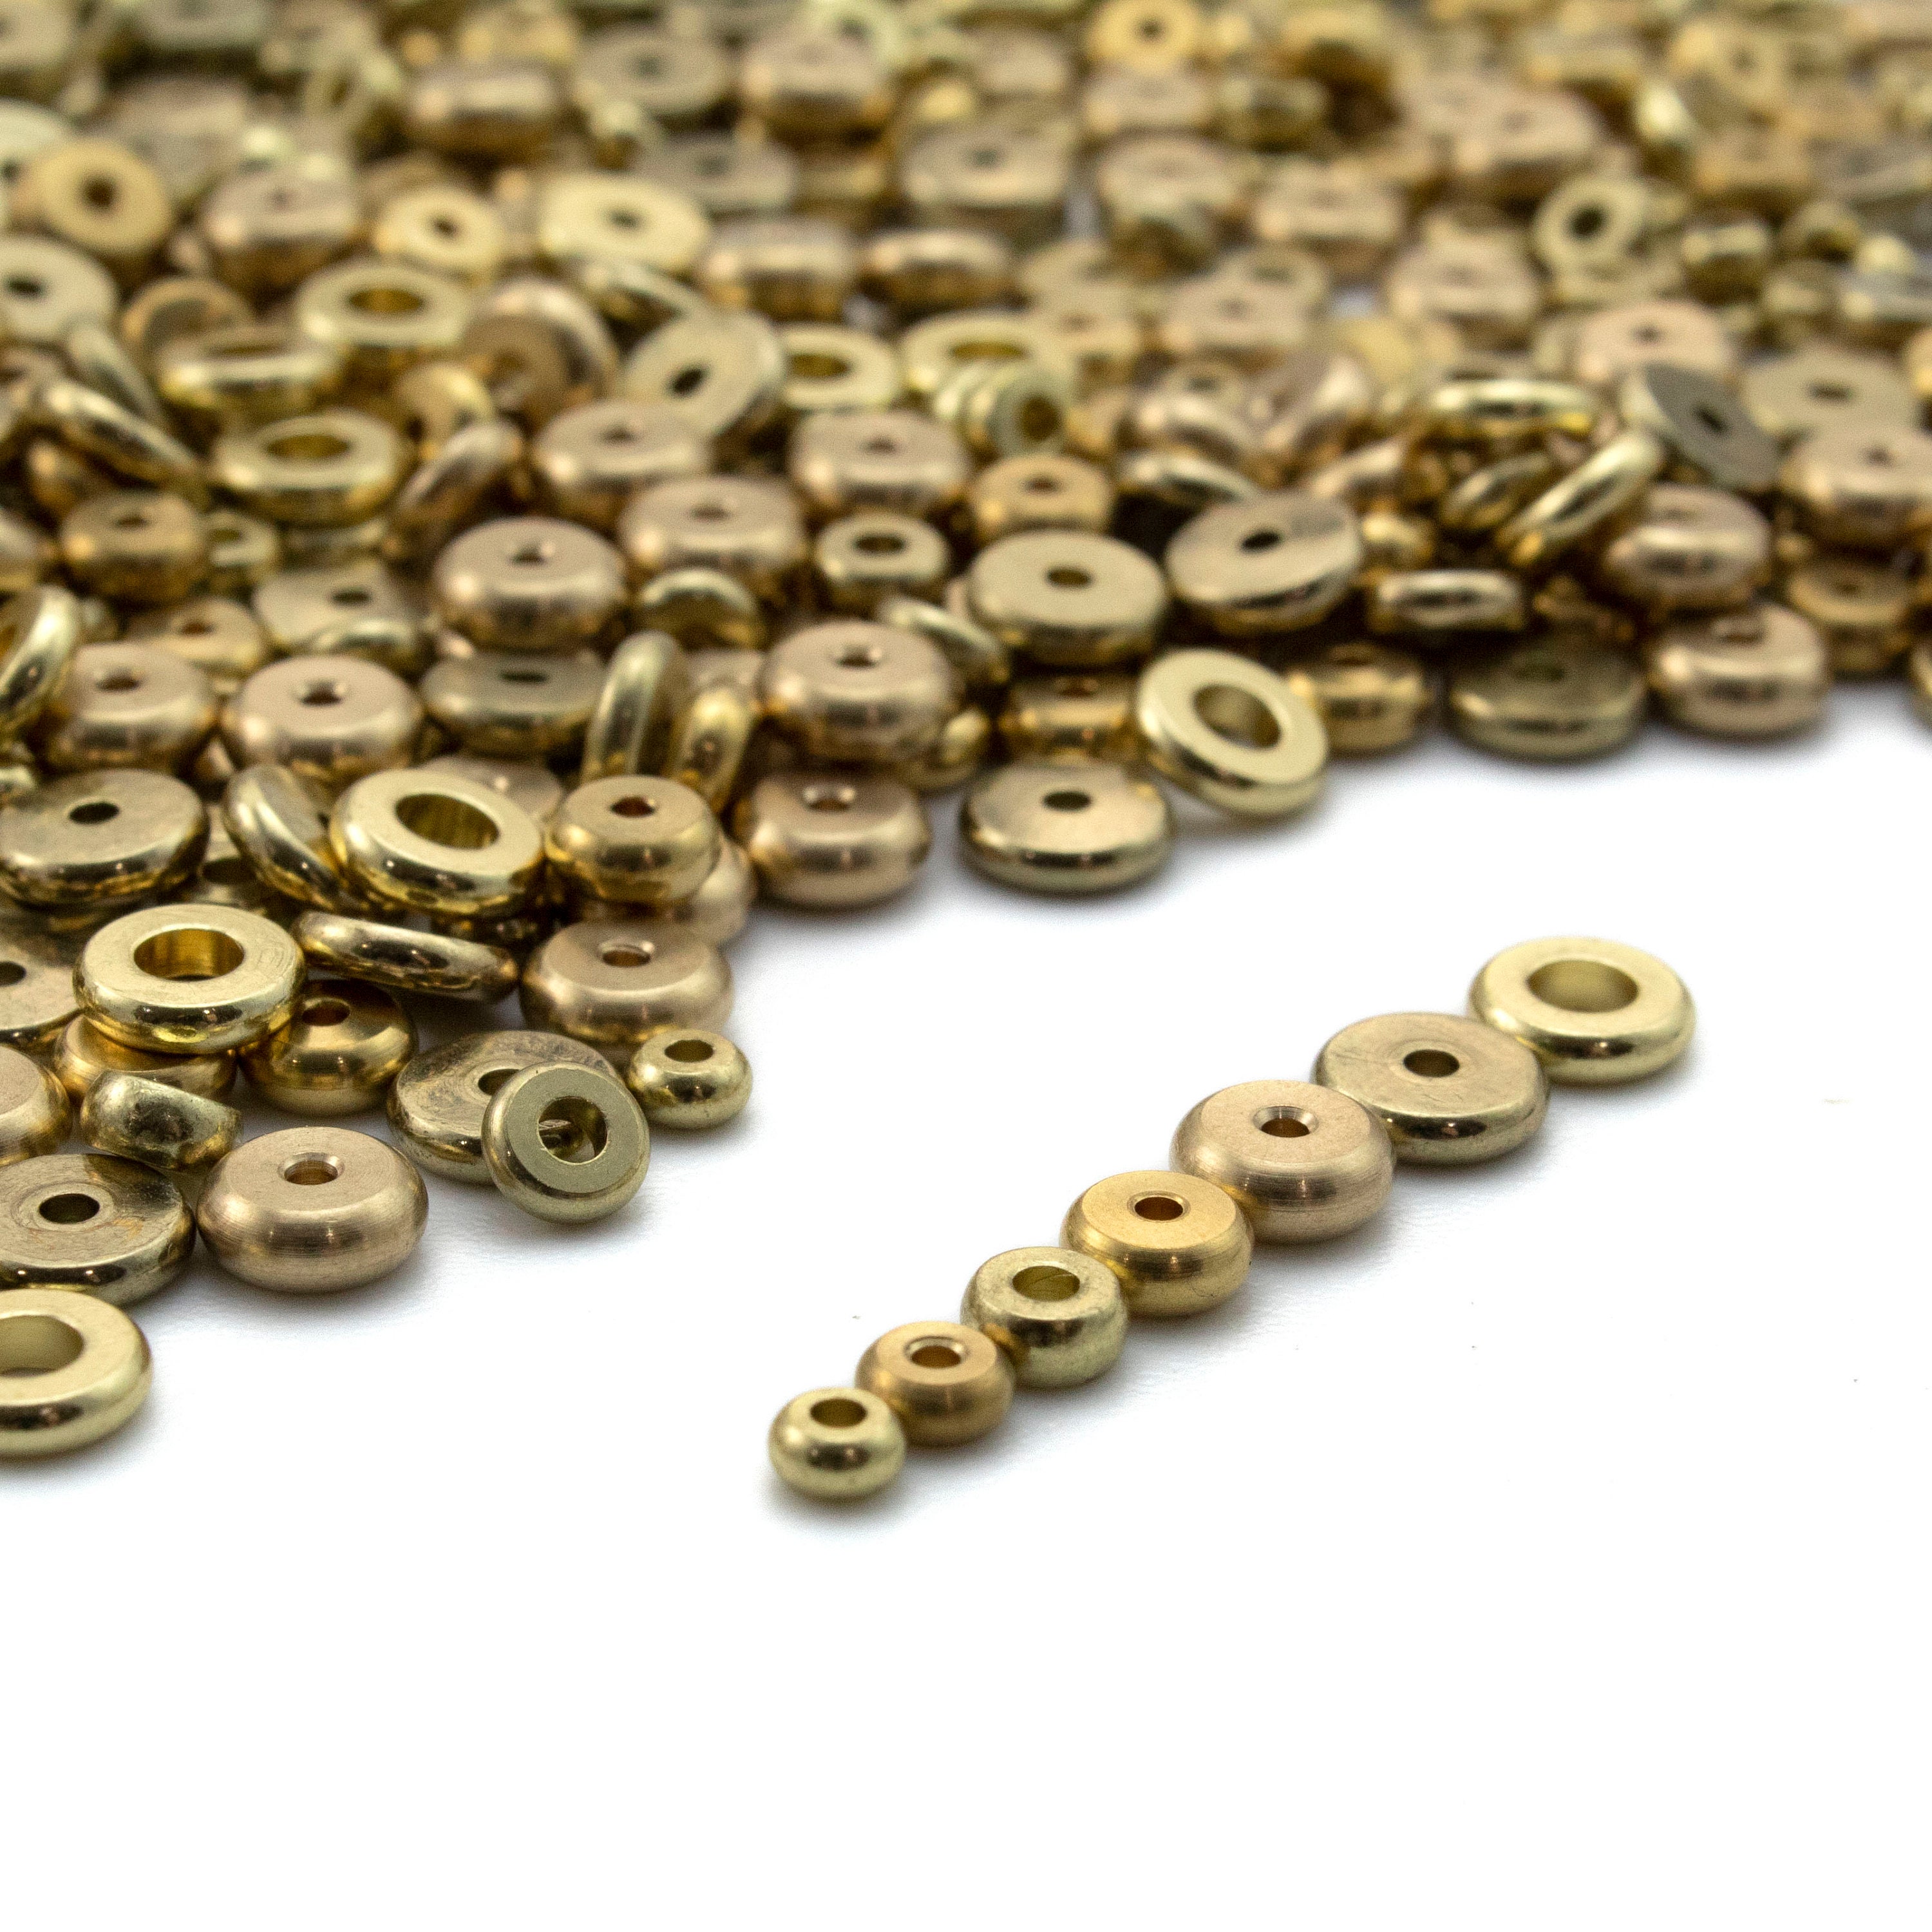 Bronze Bicone Metal Spacer Beads 5mm x 4mm, 100pcs – Small Devotions